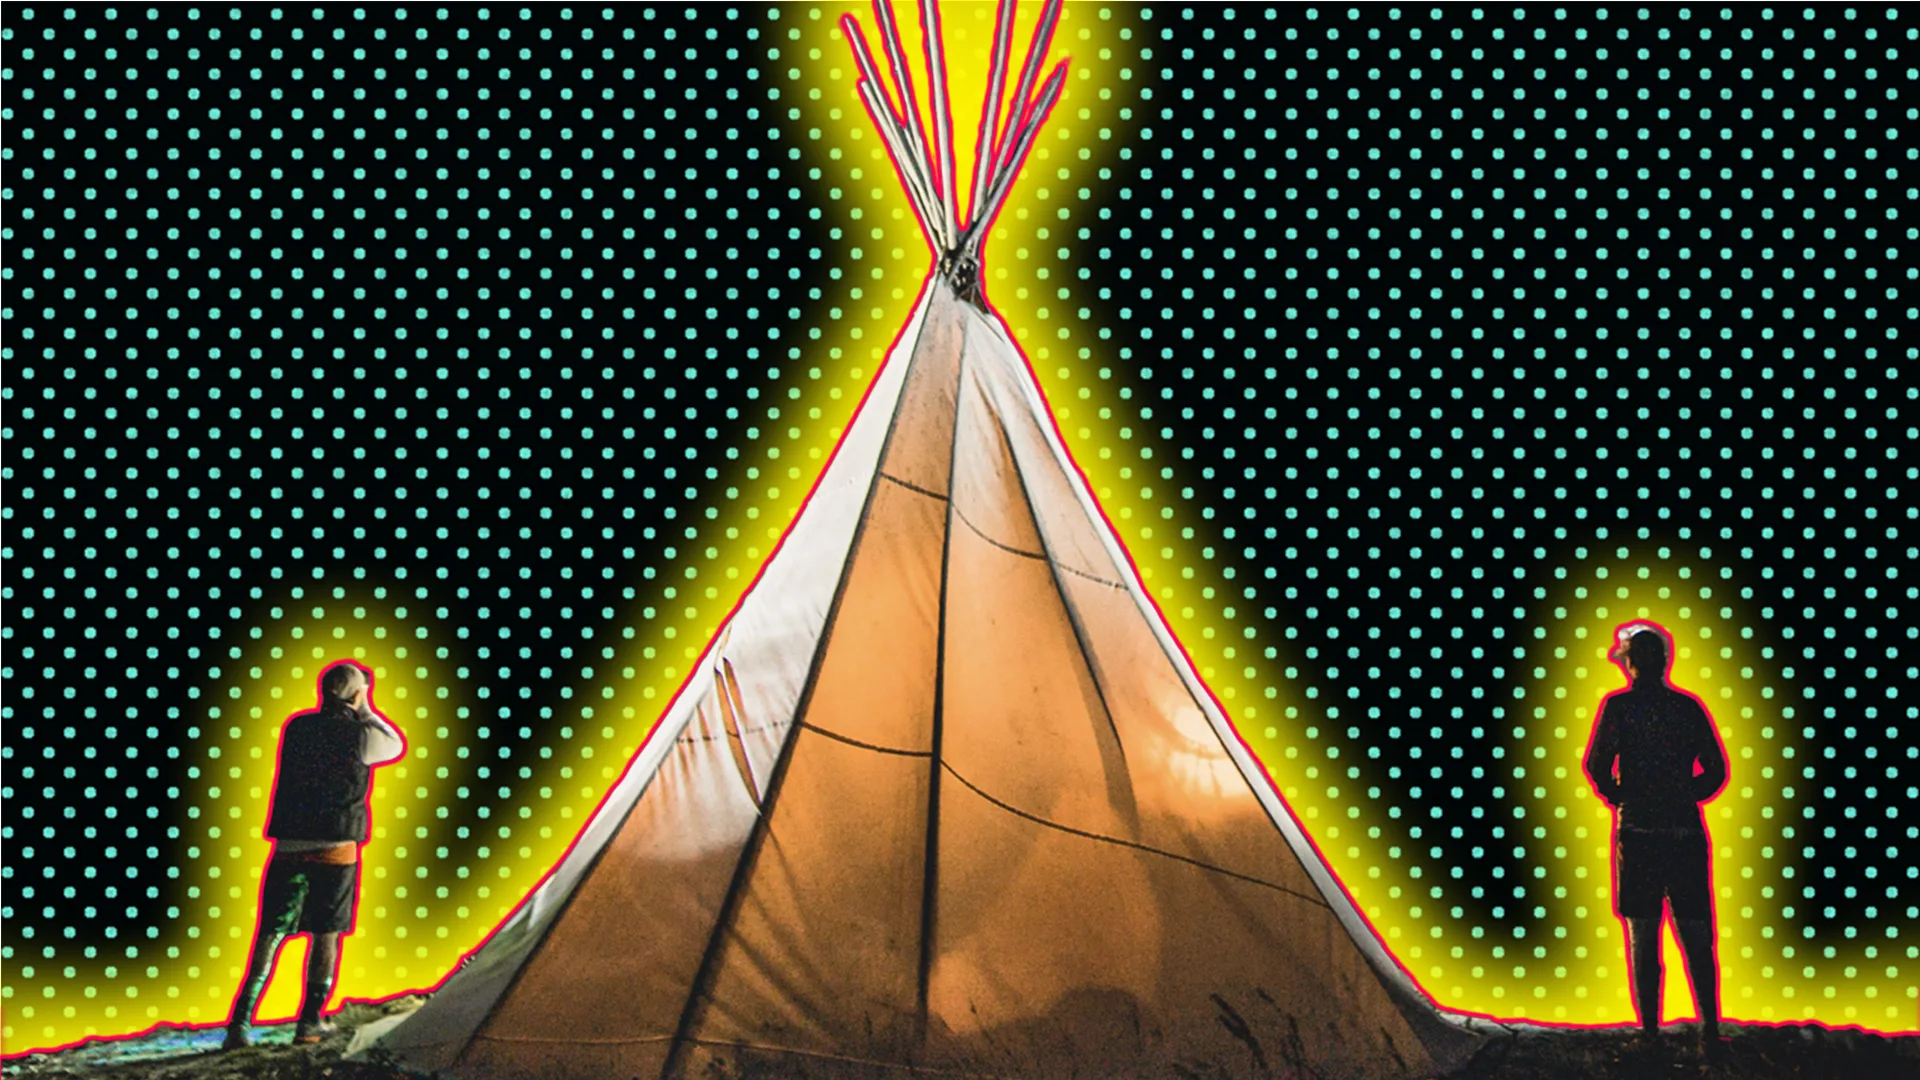 People camping with a teepee - in graphic house style